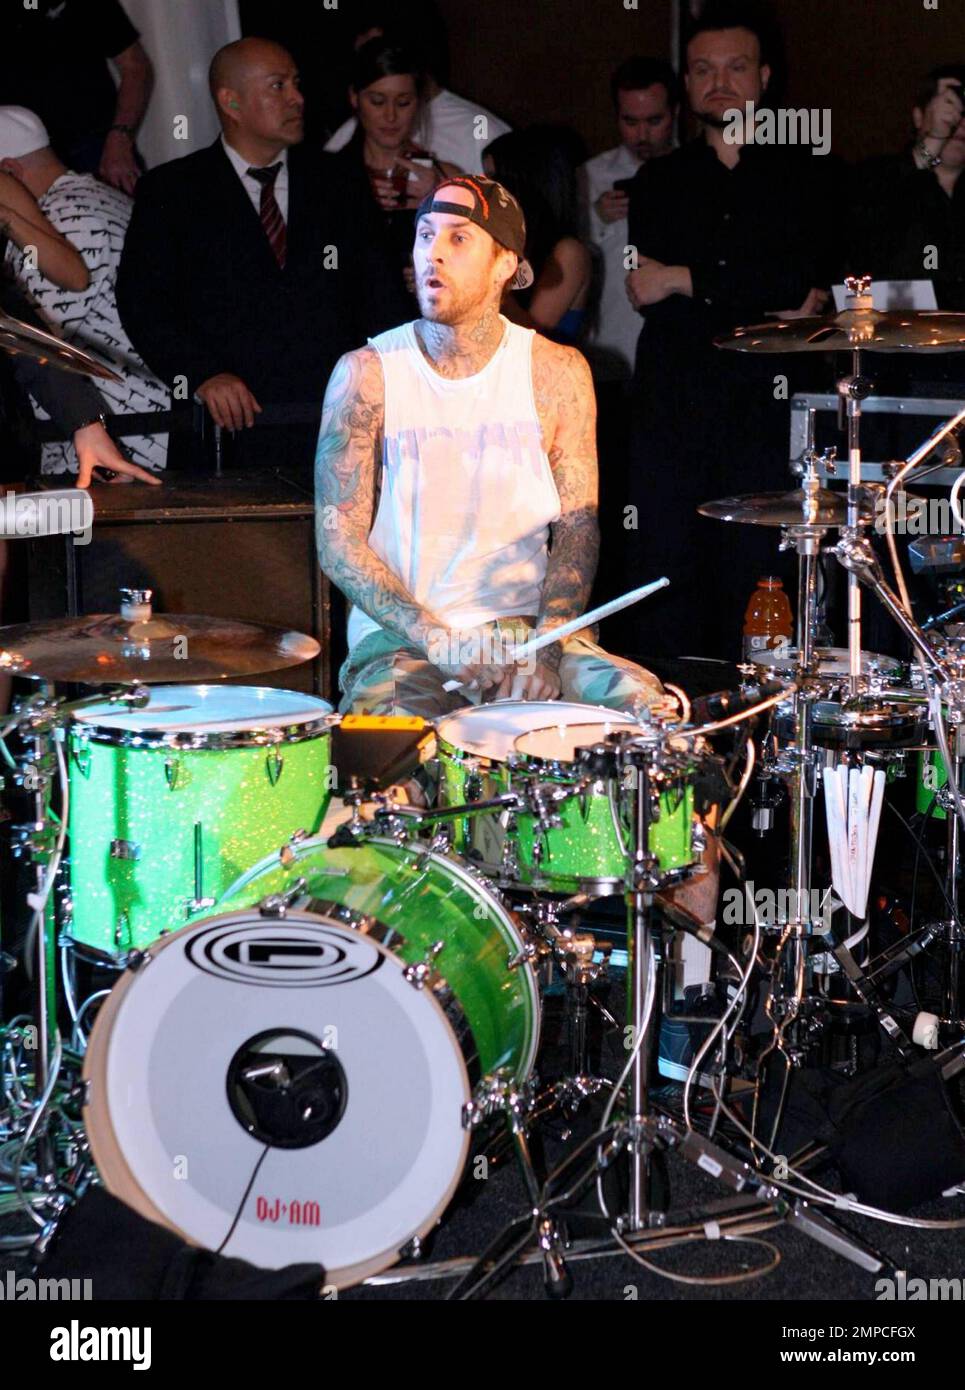 Travis Barker and DJ A-Trak kick off their first tour together with a special performance at PURE nightclub inside Caesar's Palace. DJ A-Trak took the place of DJ AM, who died from a reported accidental drug overdose last year. Barker has a DJ AM sticker on his drumset in memory of his good friend. Las Vegas, NV. 3/12/10.     . Stock Photo